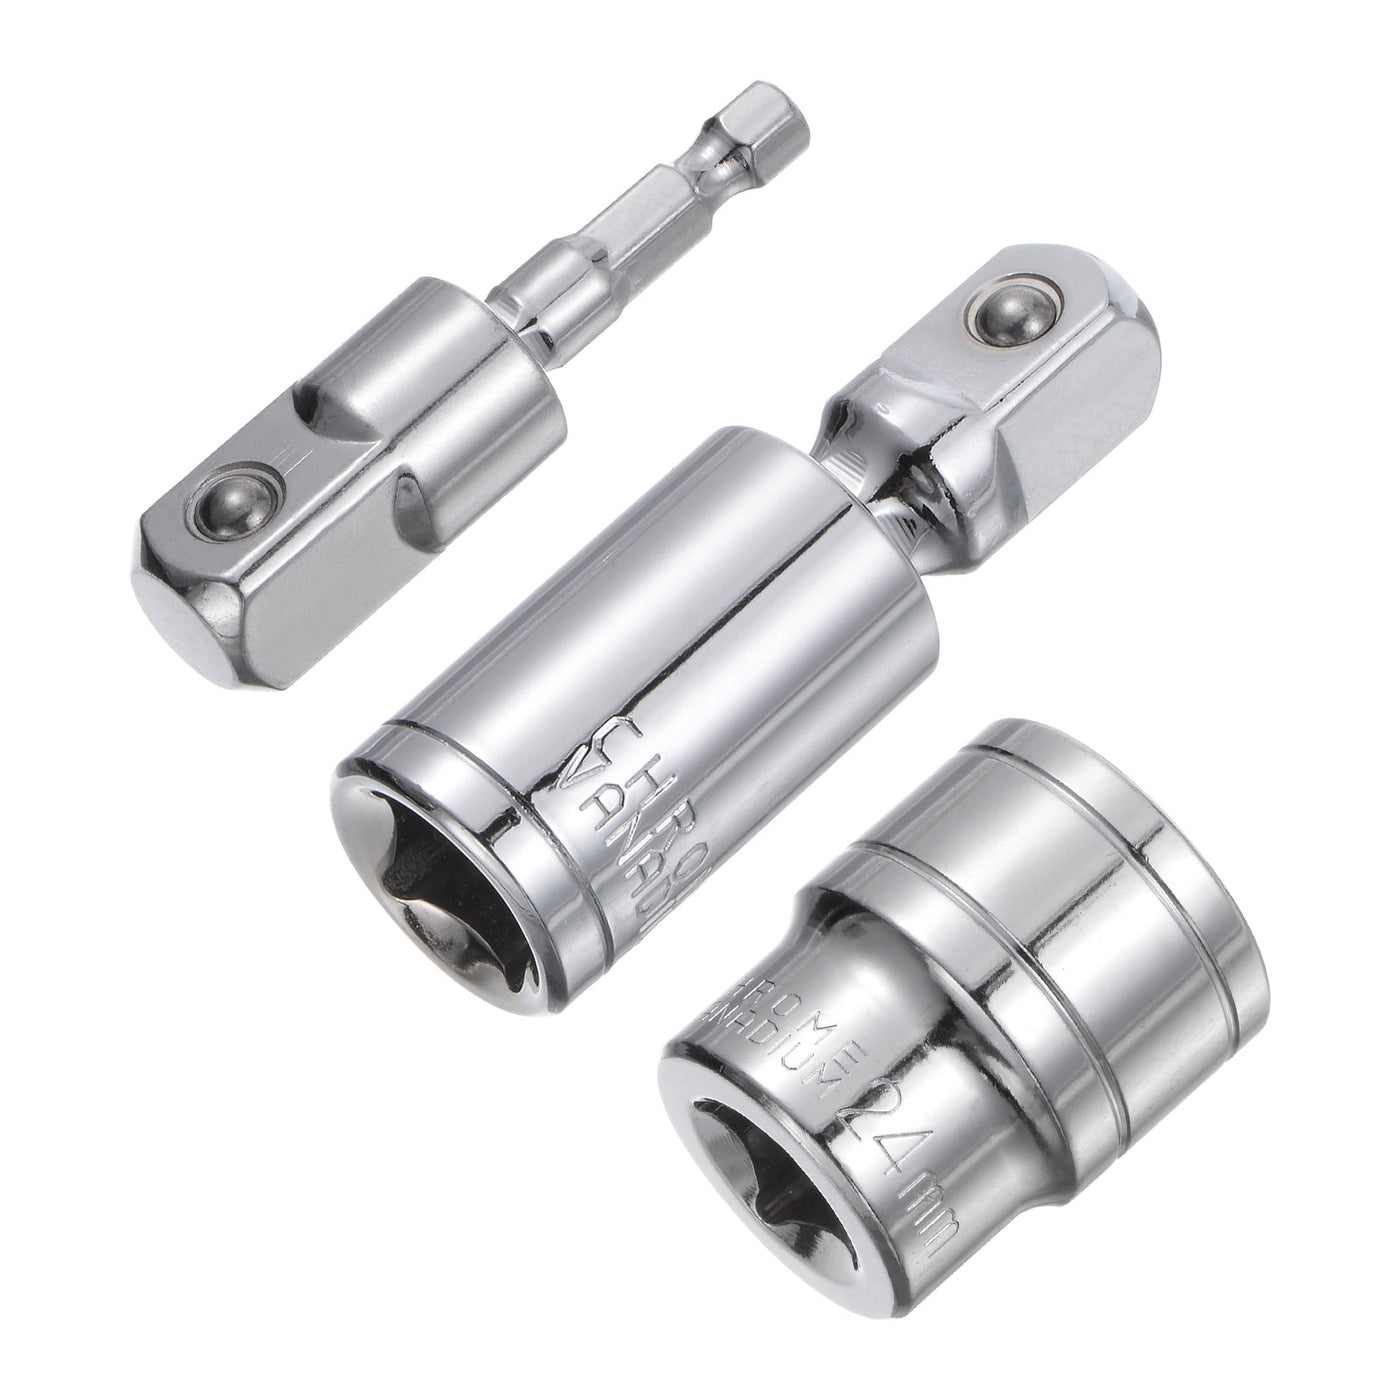 uxcell Uxcell 1/2" Drive 24mm Shallow Socket Swivel Joints Hex Shank Impact Driver Adaptor Set